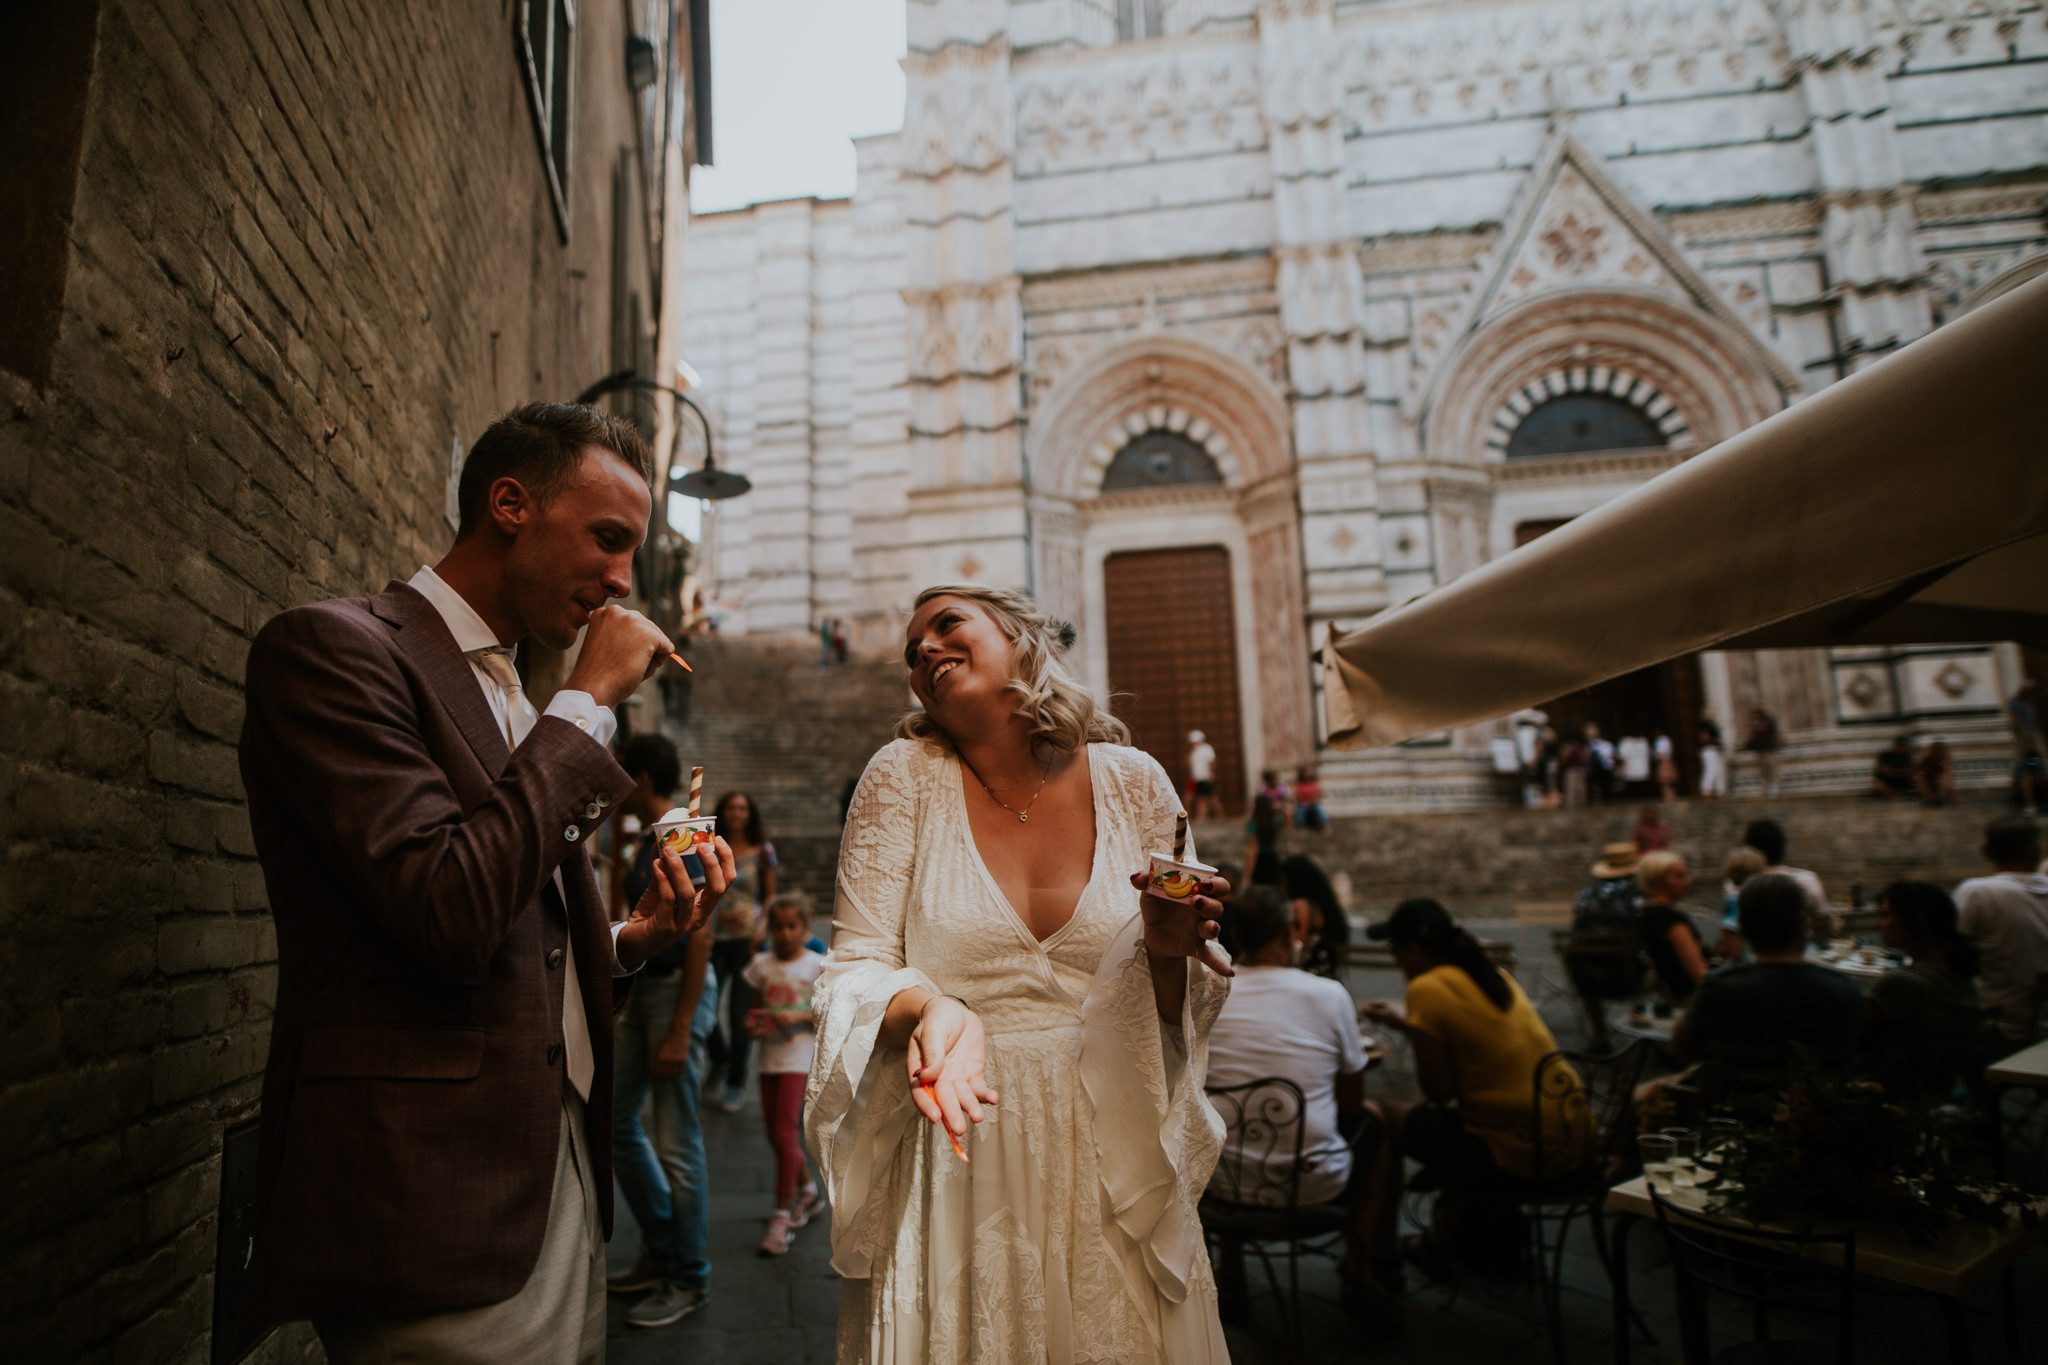 A bride and groom eat ice cream together in Siena, Tuscany, Italy